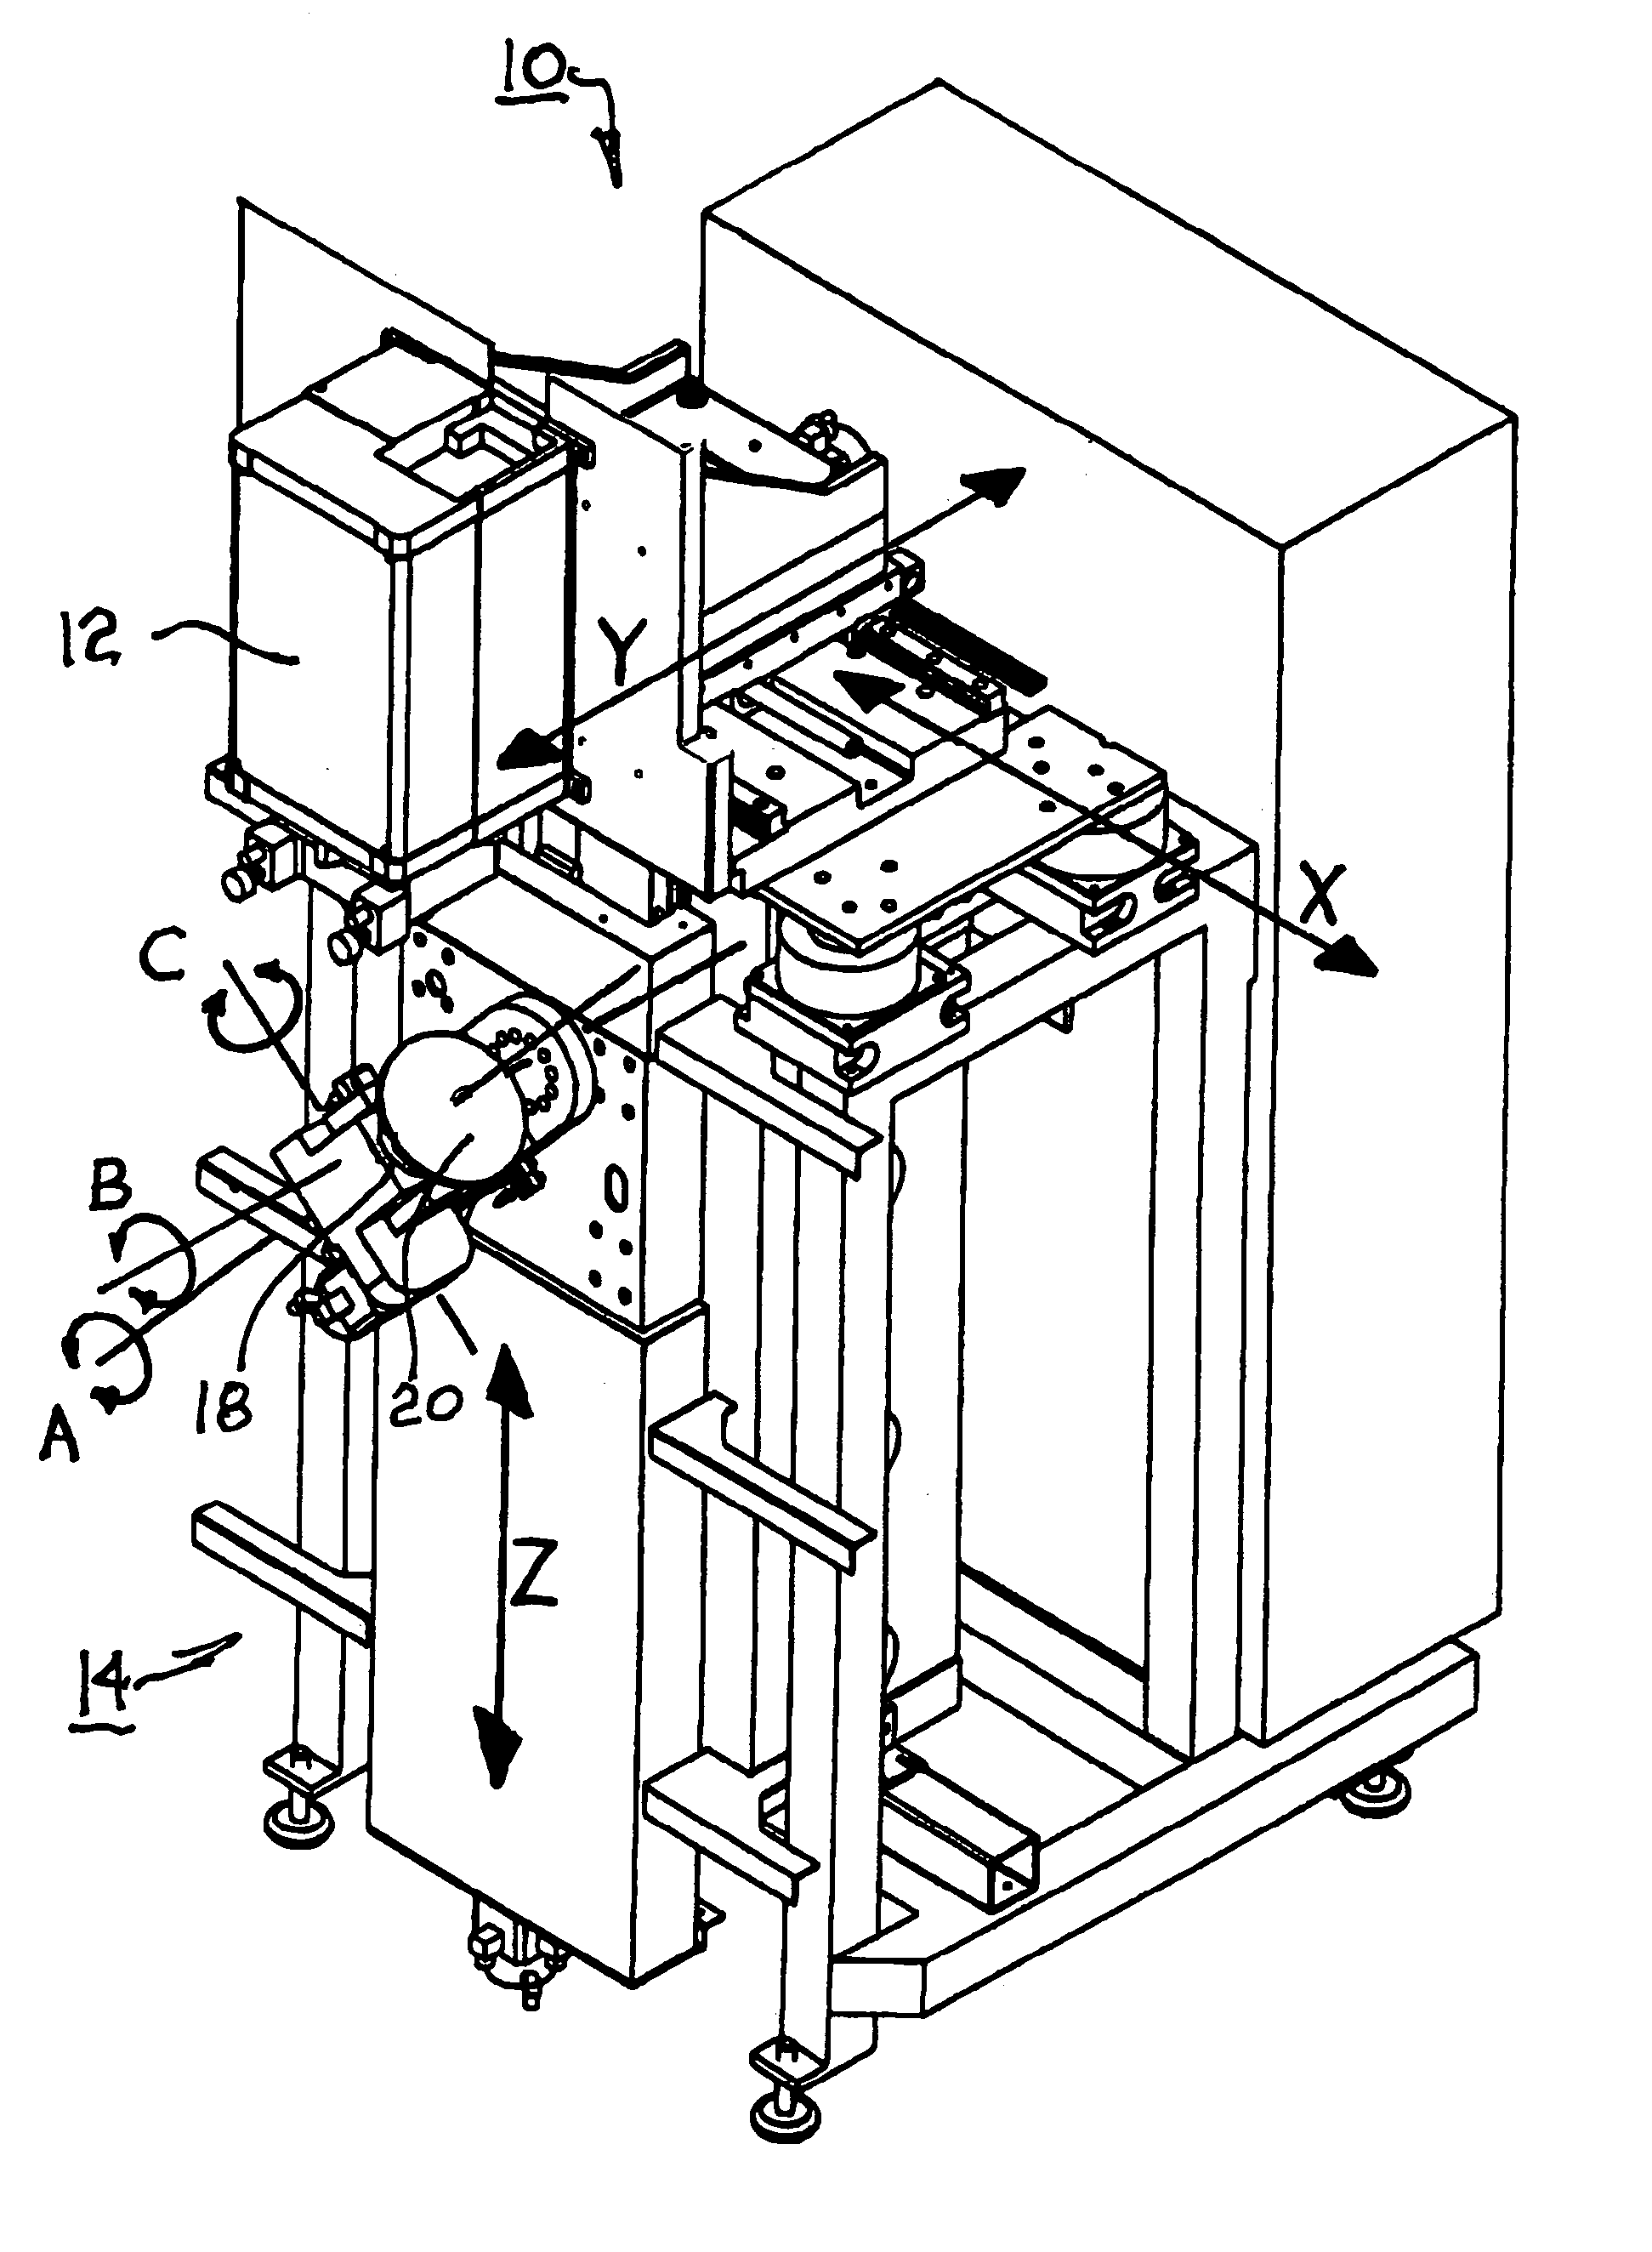 Method for calibrating the geometry of a multi-axis metrology system